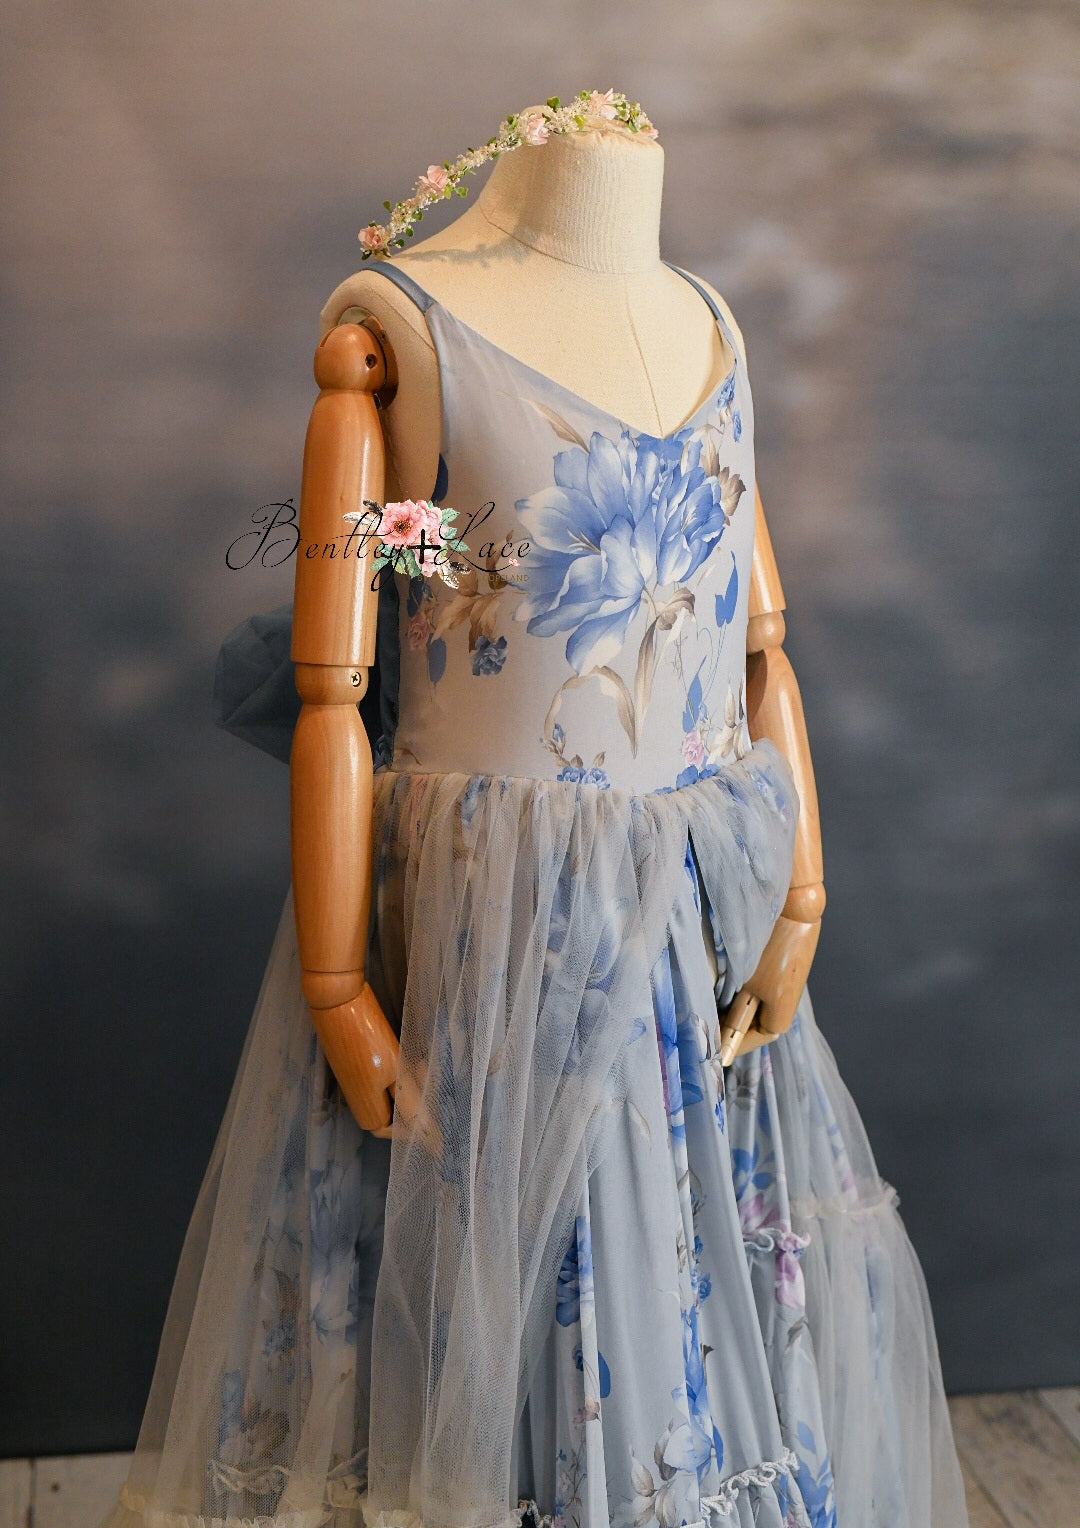 New Modified "Hillary" - floral - Beautiful boho inspired gown - (6 - 11 YEAR)